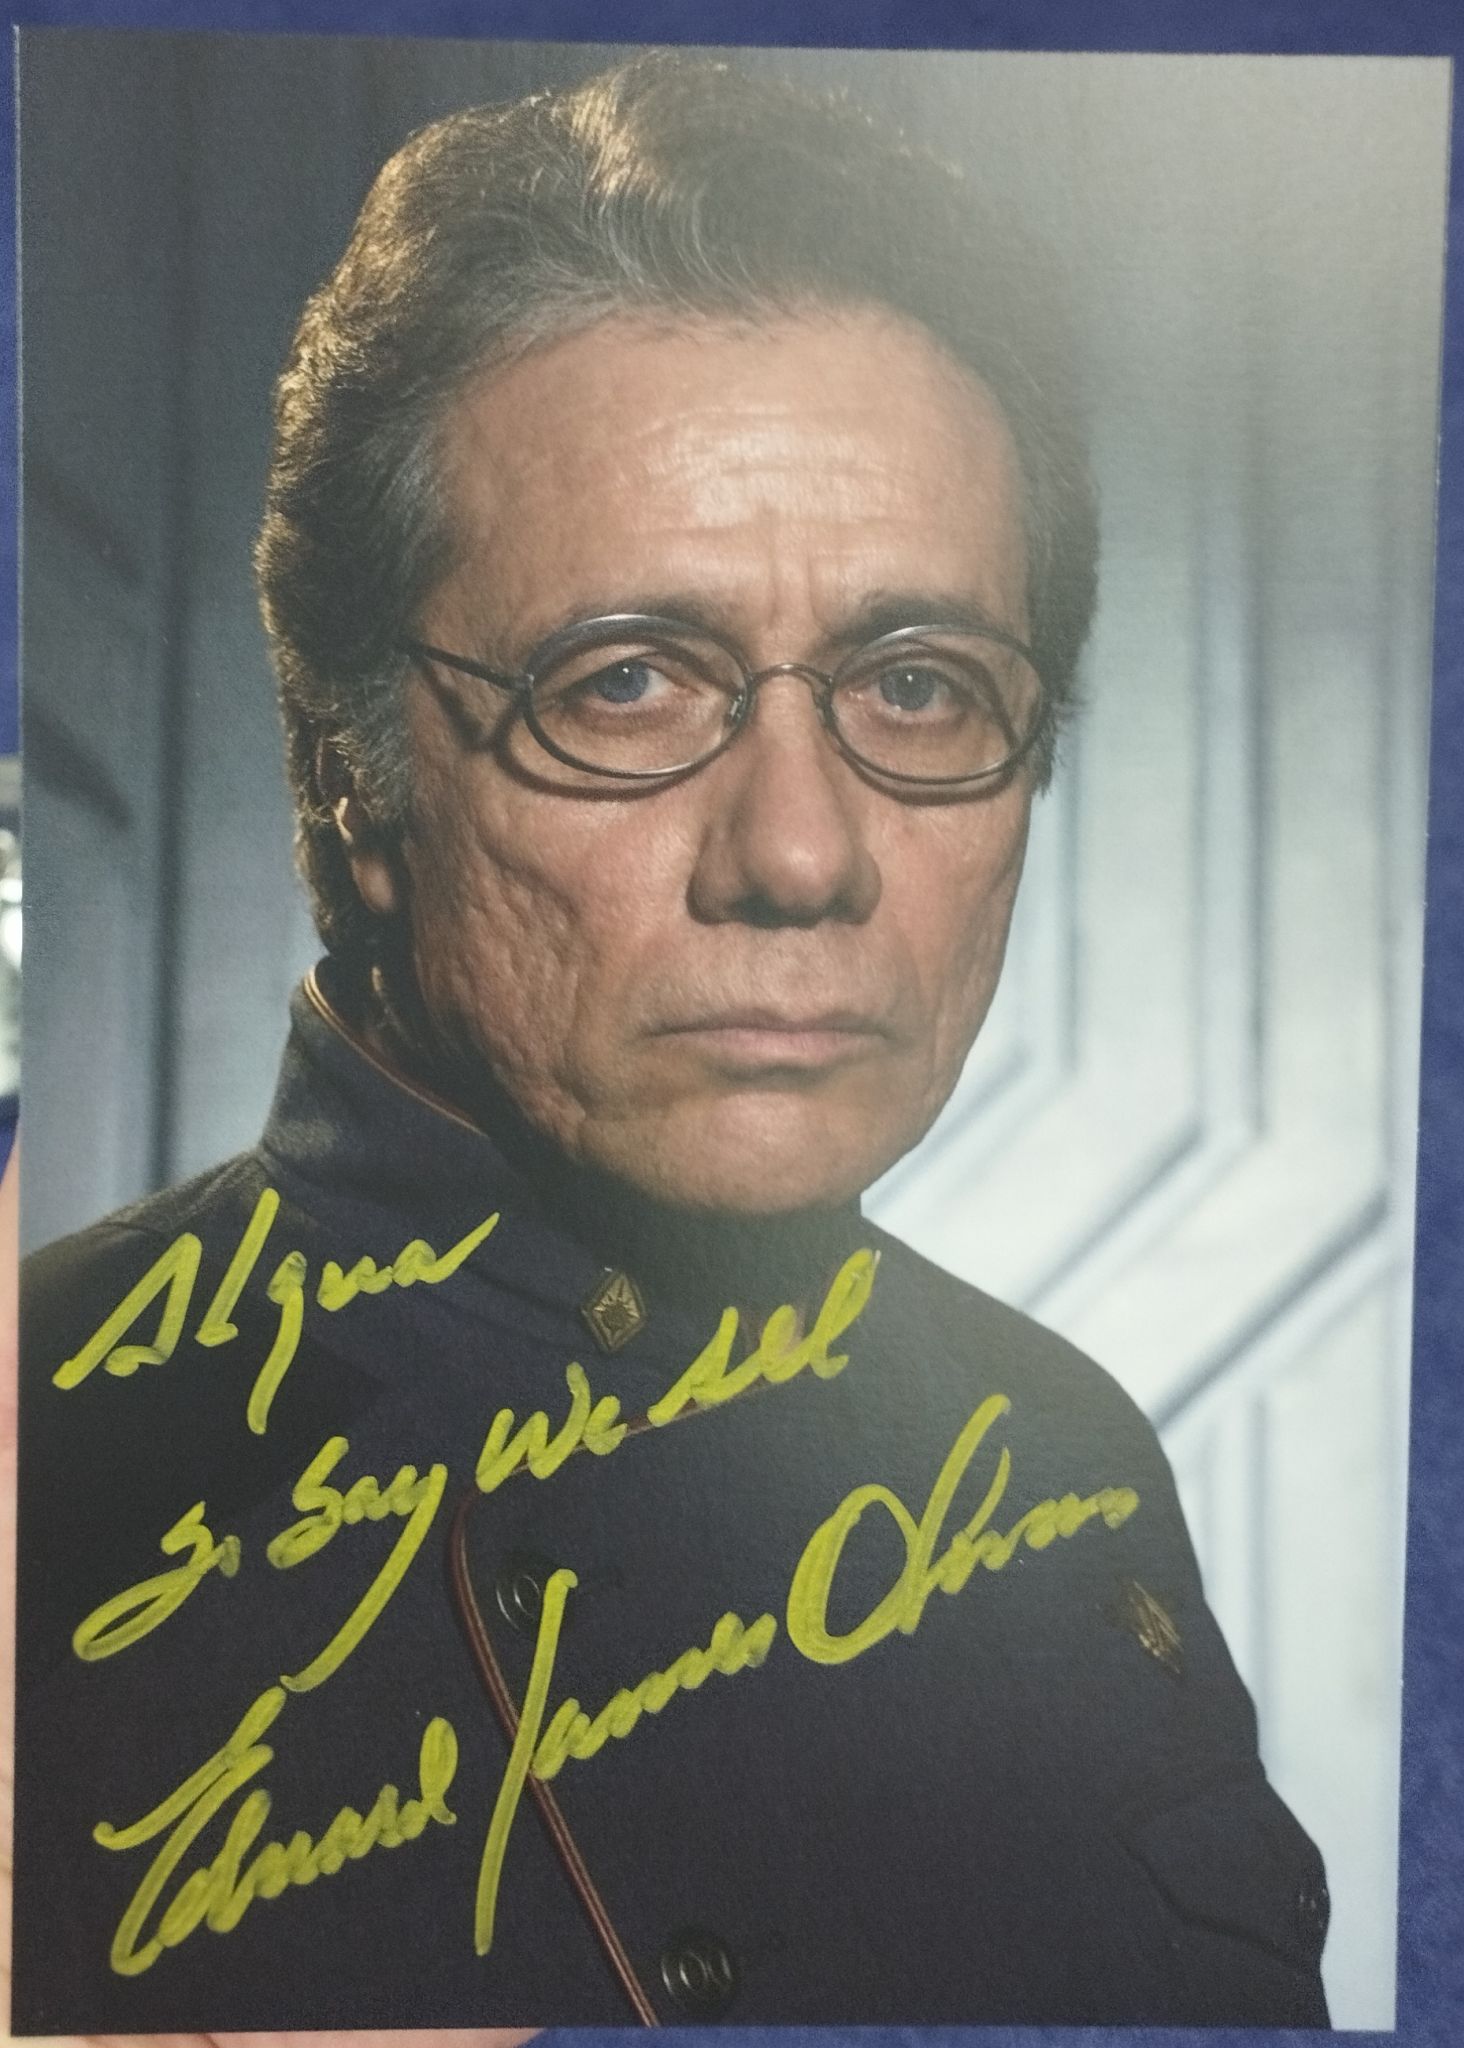 Picture from BSG with the handwritted autograph. It reads 'Alqua So say we all Edward James Olmos.'